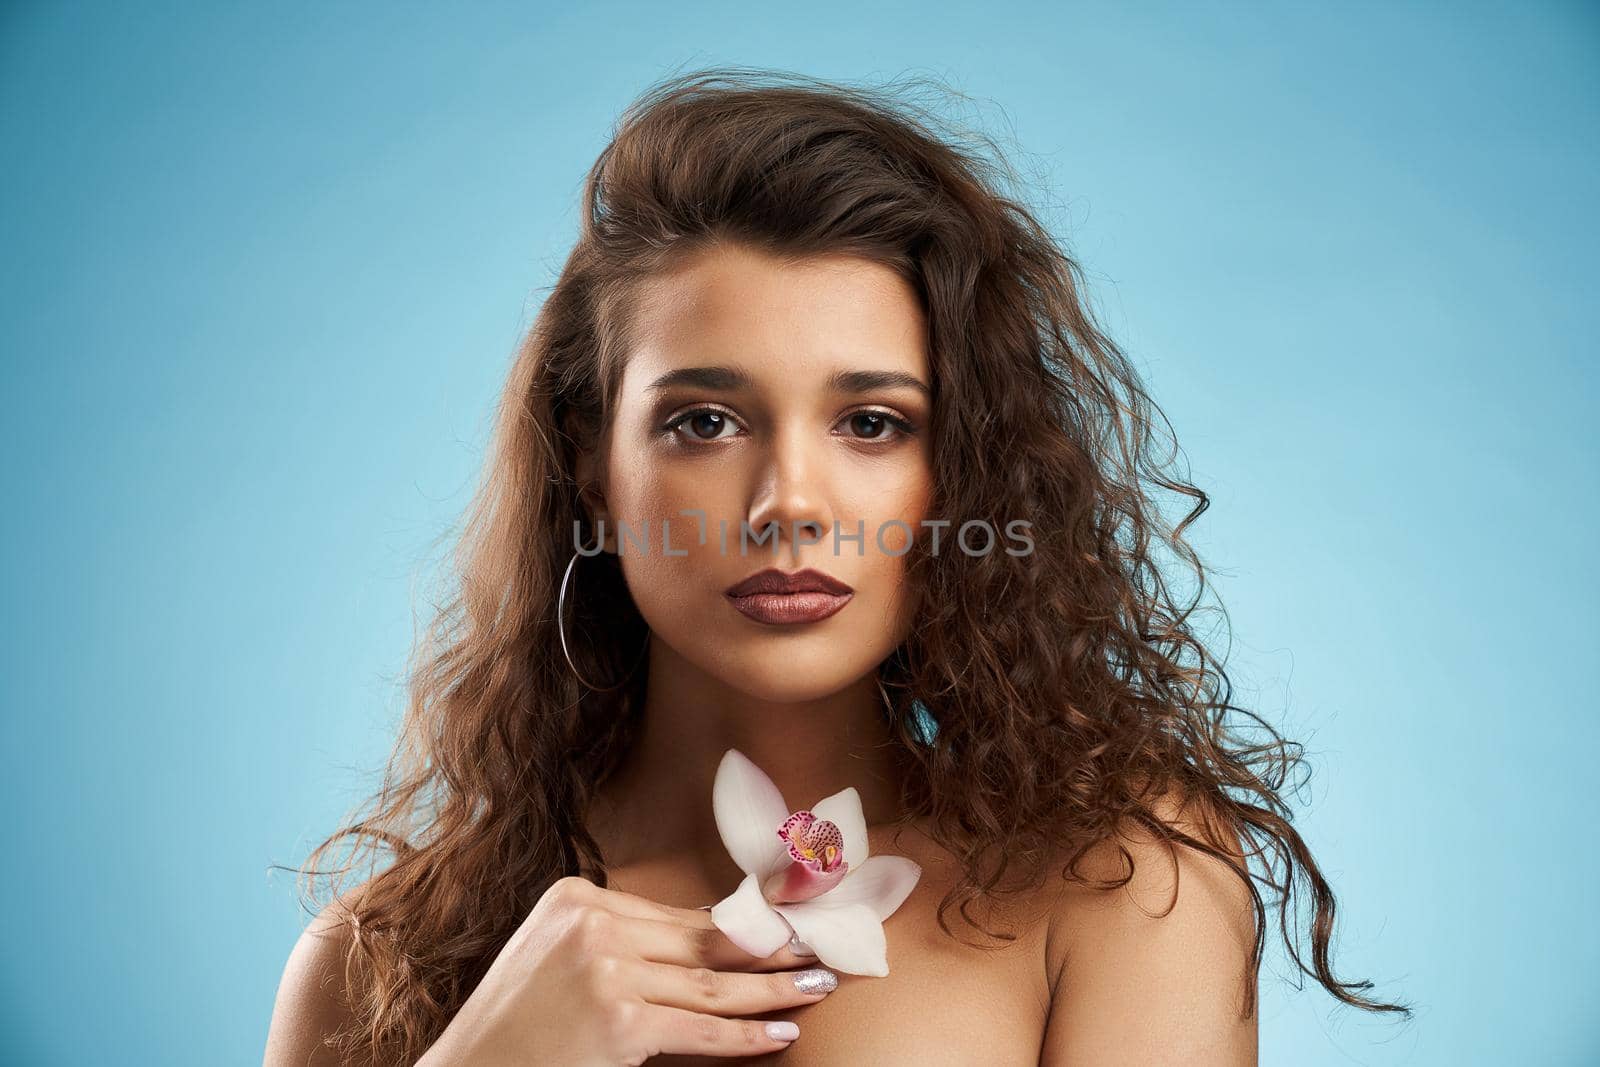 Headshot of young beautiful brunette female model holding orchid on naked chest and looking at camera. Pretty woman with curly hair posing holding pink flower in hand. Beauty, modeling concept.